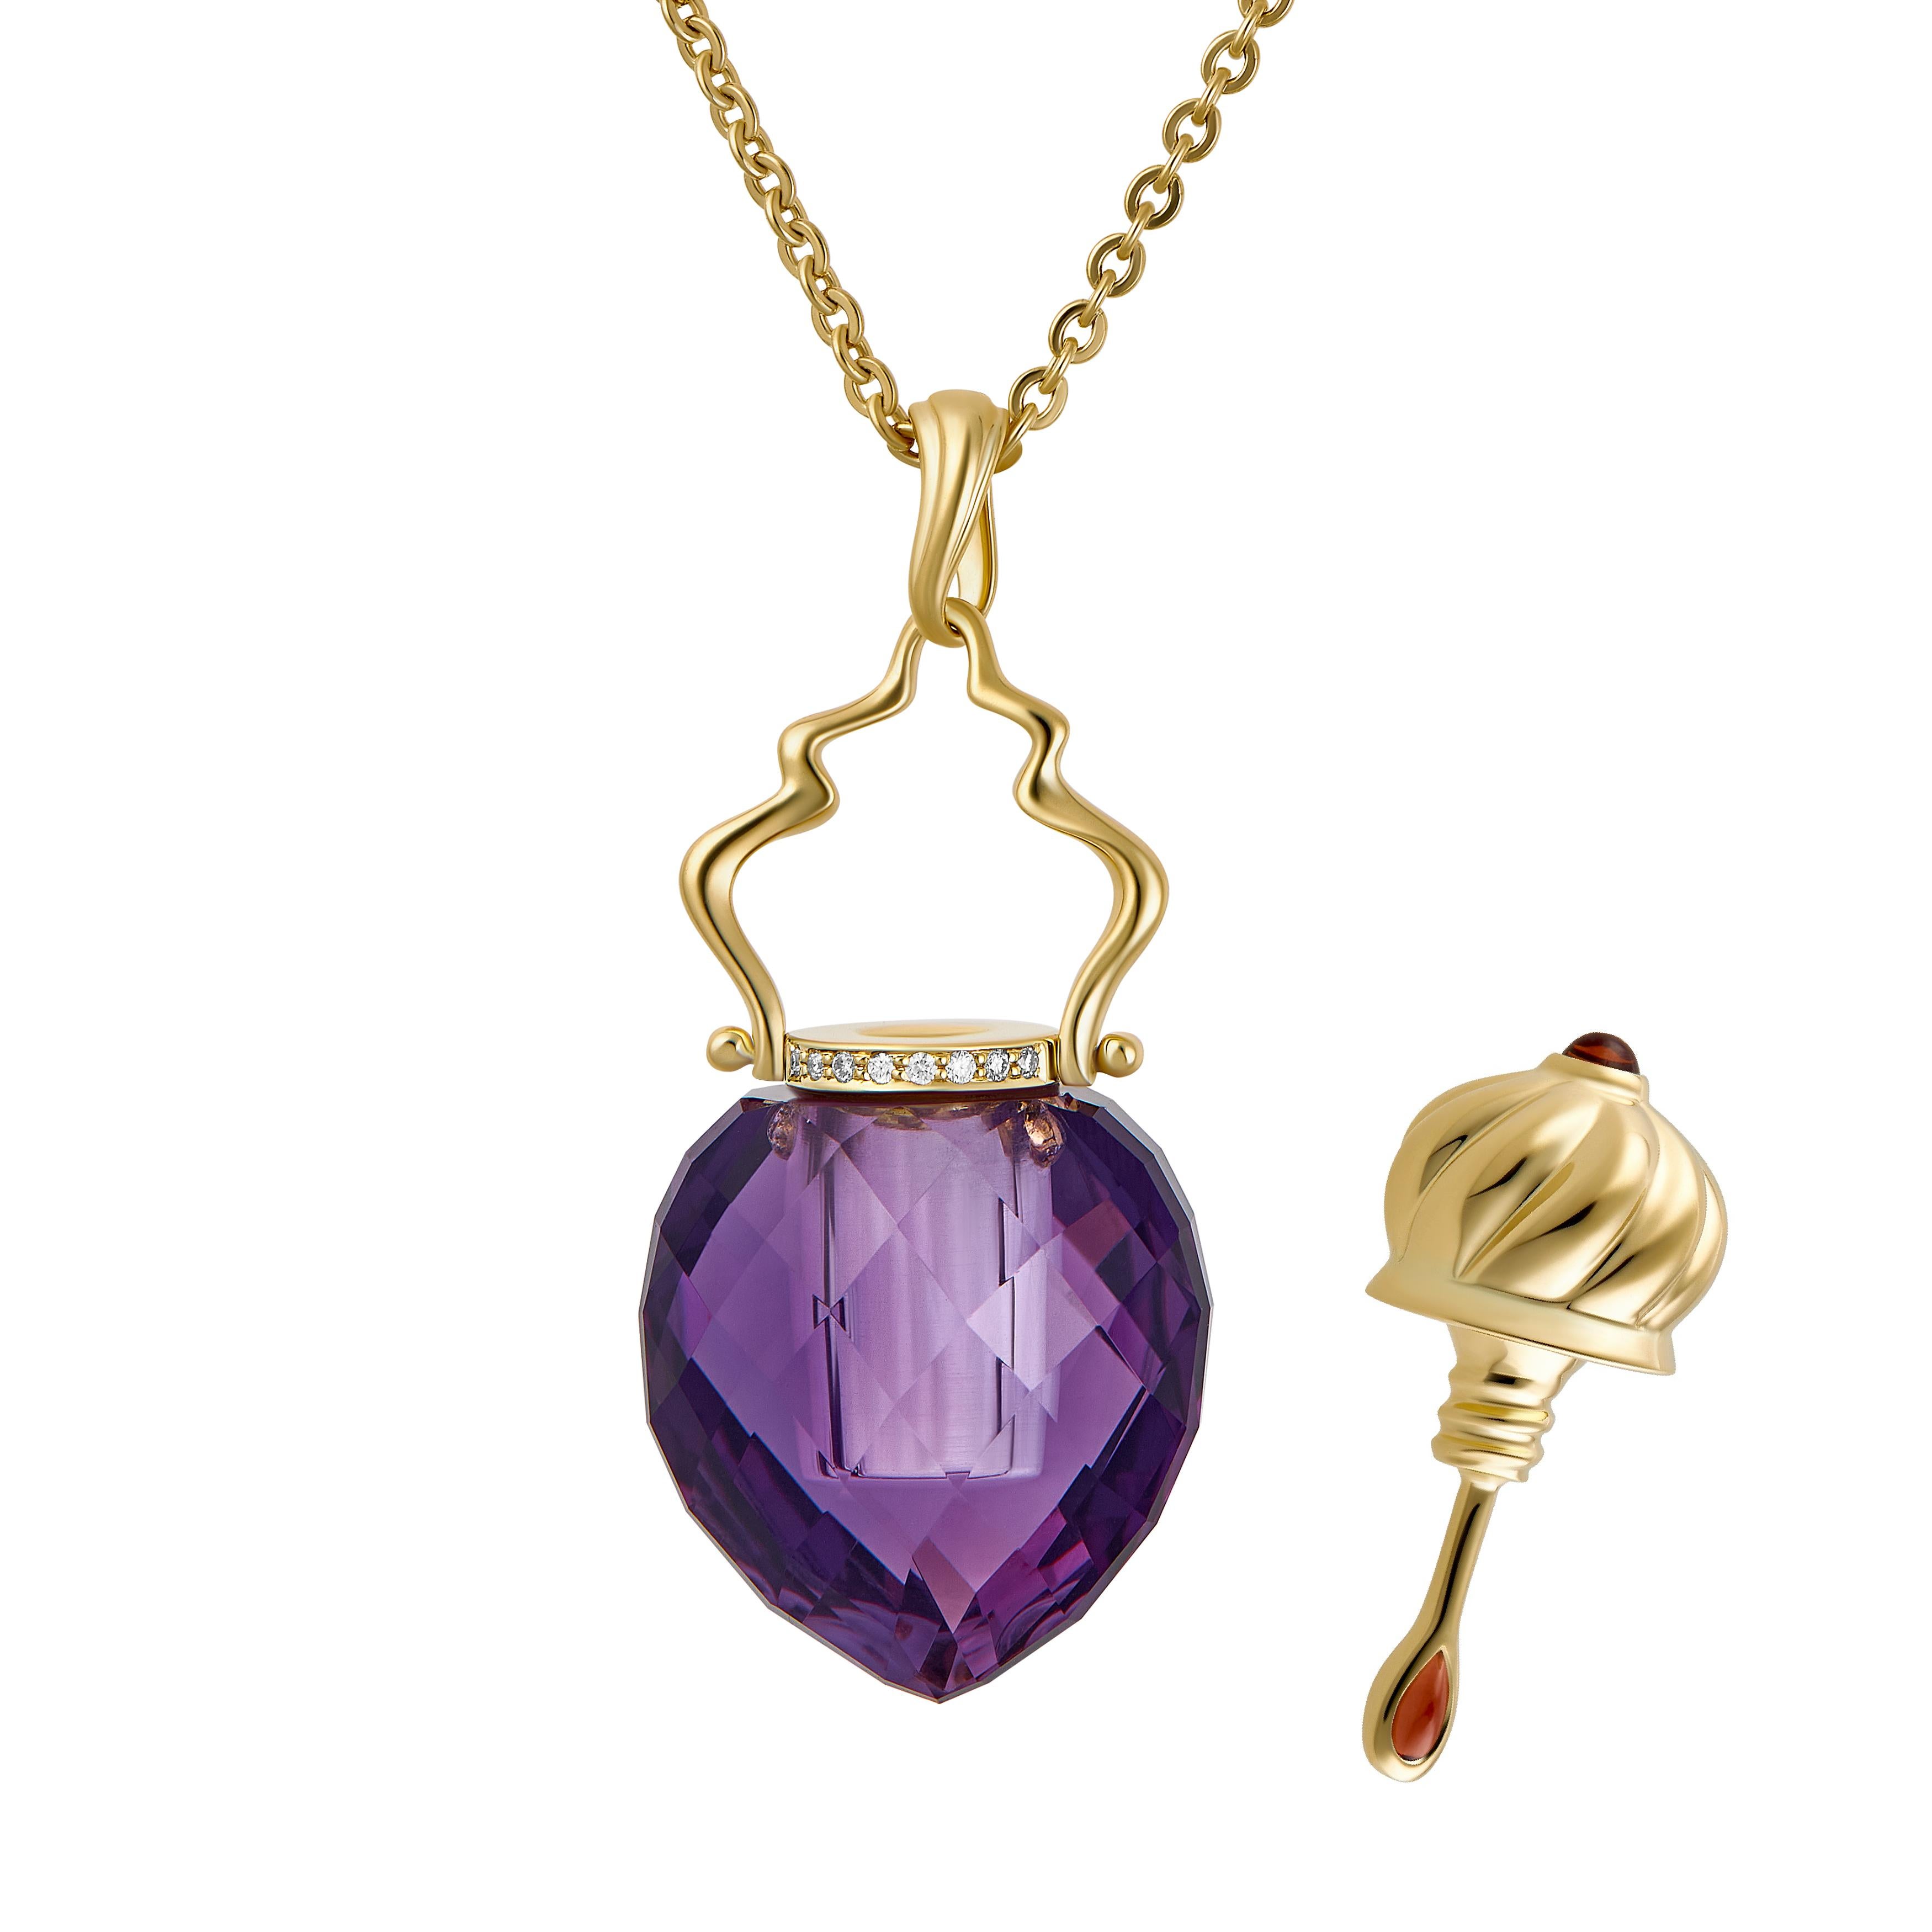 MOISEIKIN® invites you to a unique opportunity to keep your favourite scents at the very heart. Inspired by an ancient tradition, this precious pendant necklace has an elegant perfume bottle. The vivid natural amethyst vial is specially carved in